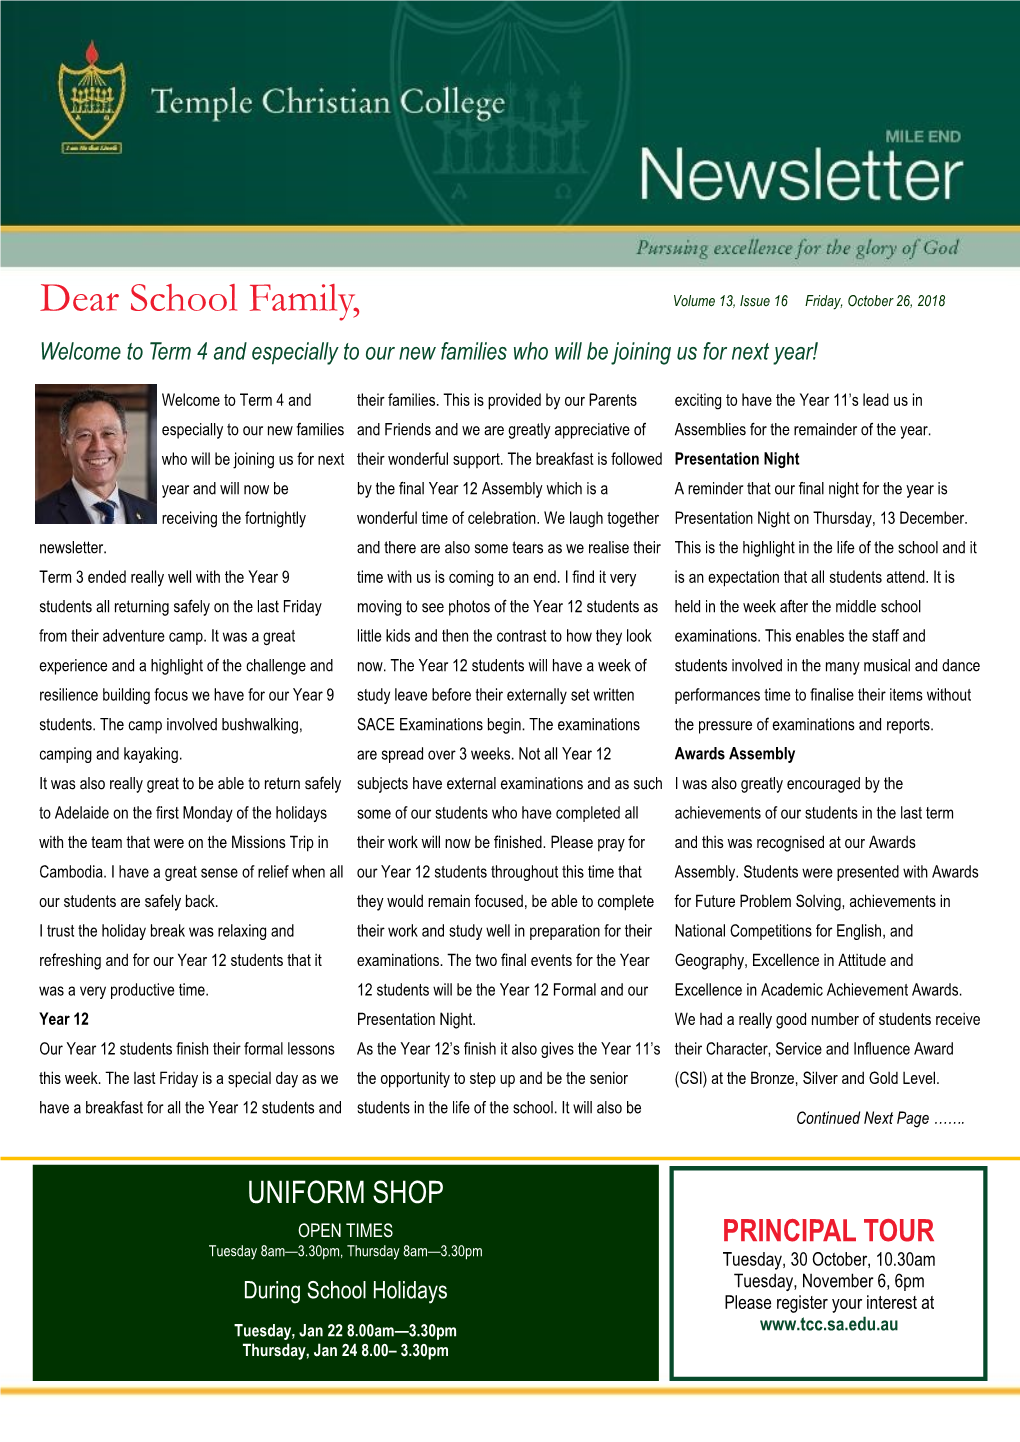 Dear School Family, Volume 13, Issue 16 Friday, October 26, 2018 Welcome to Term 4 and Especially to Our New Families Who Will Be Joining Us for Next Year!